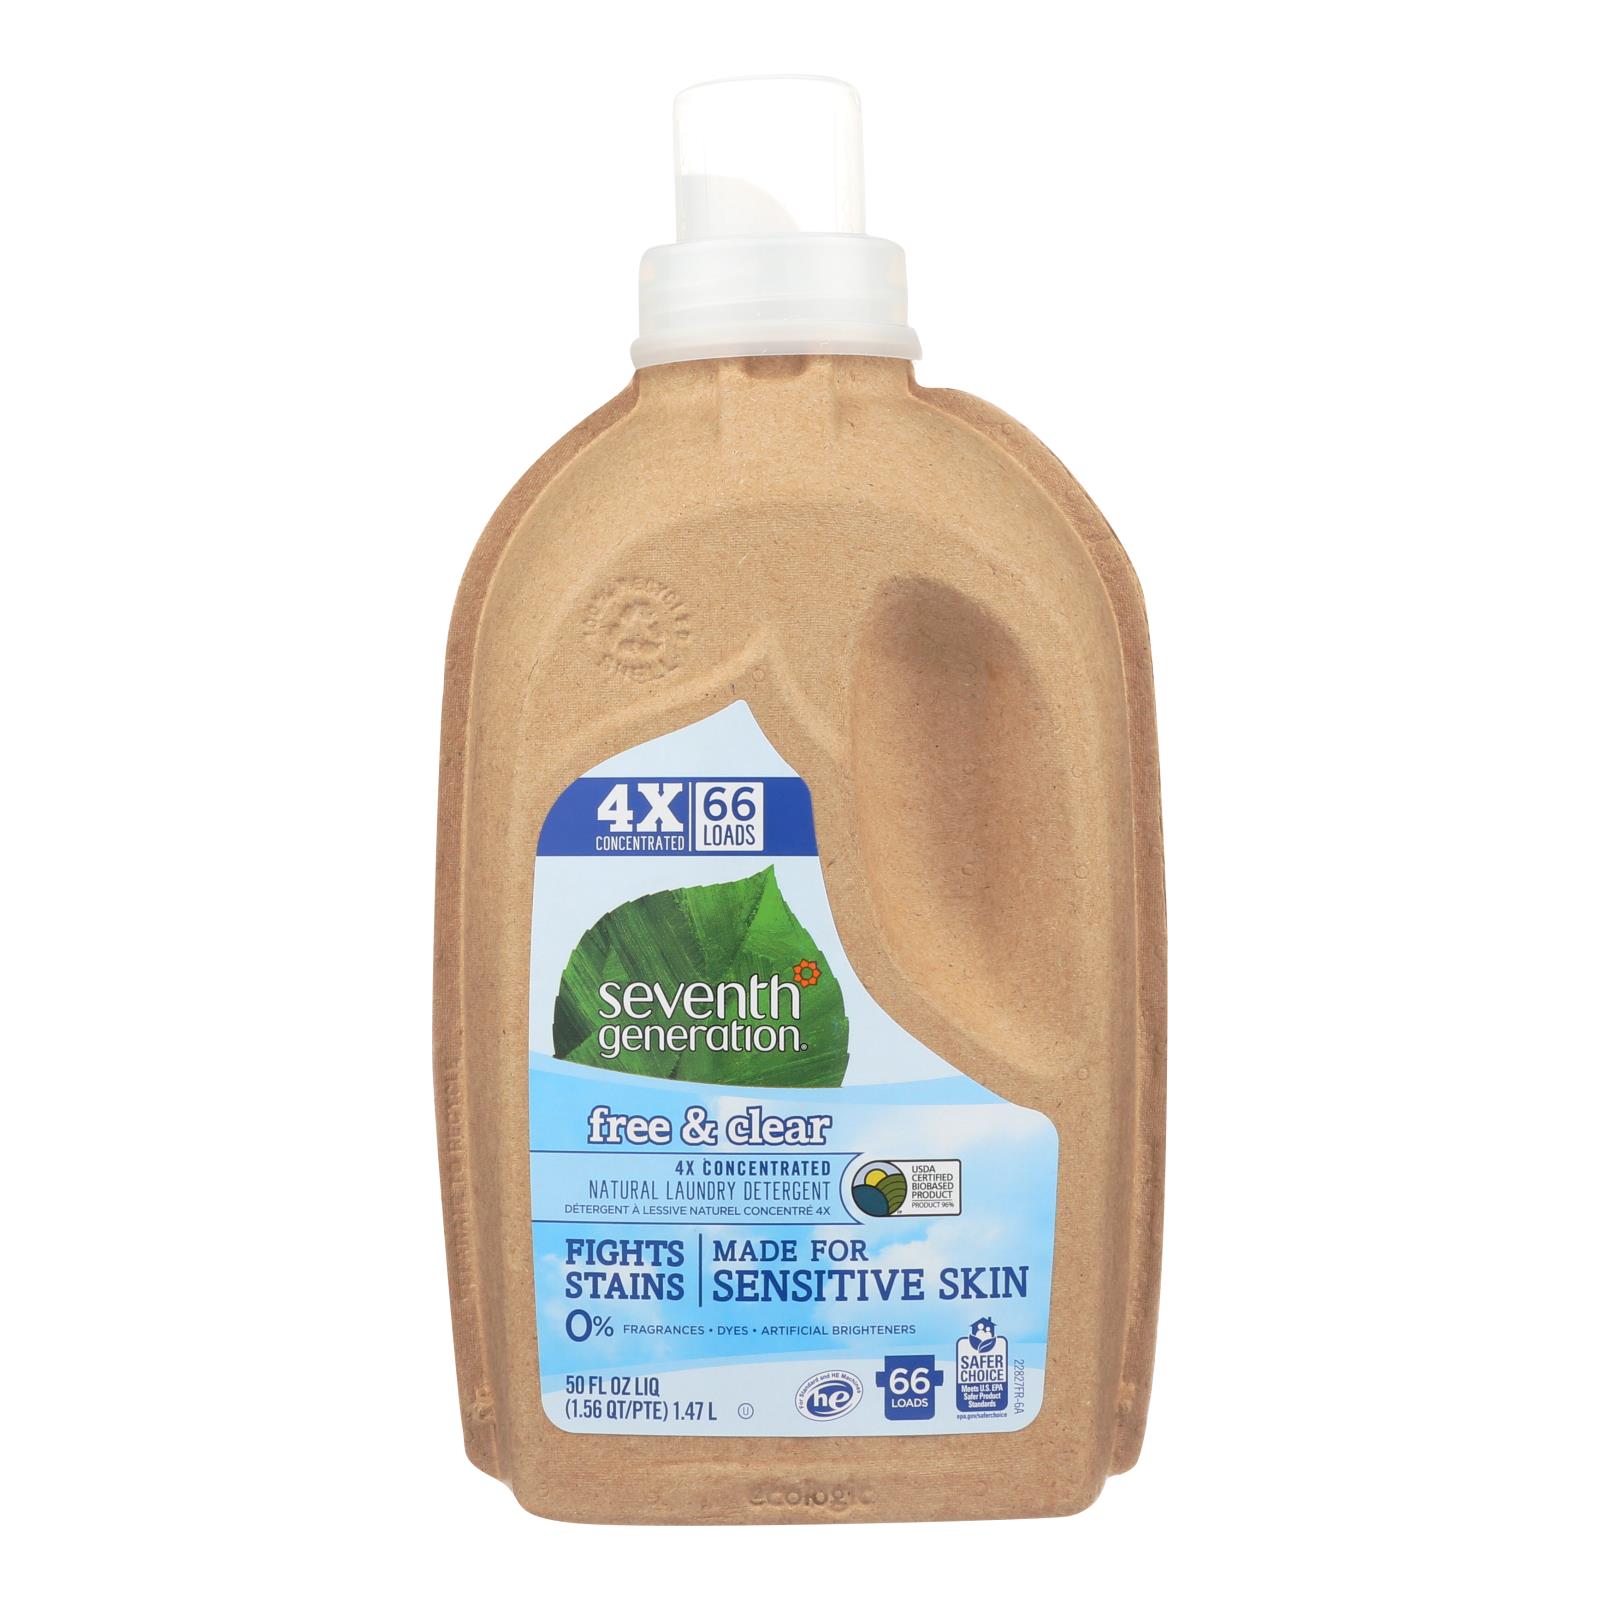 Seventh Generation 4X Concentrated Natural Laundry Detergent Free & Clear - image 1 of 3